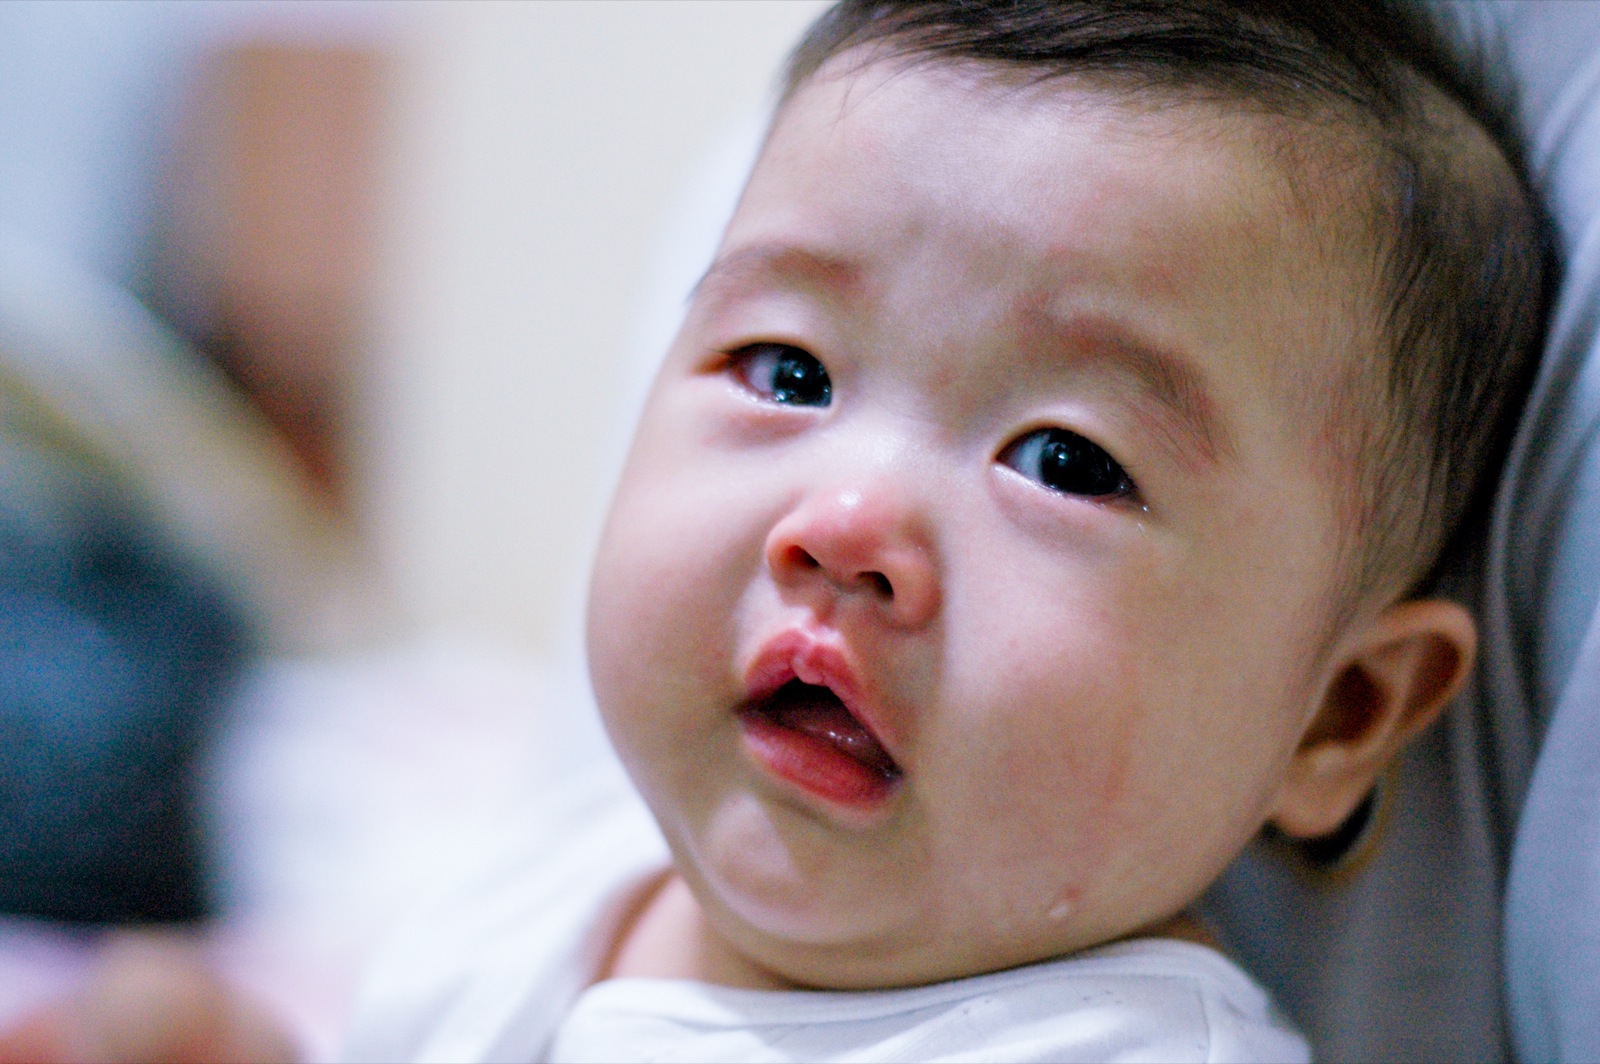 Baby with tear running down face